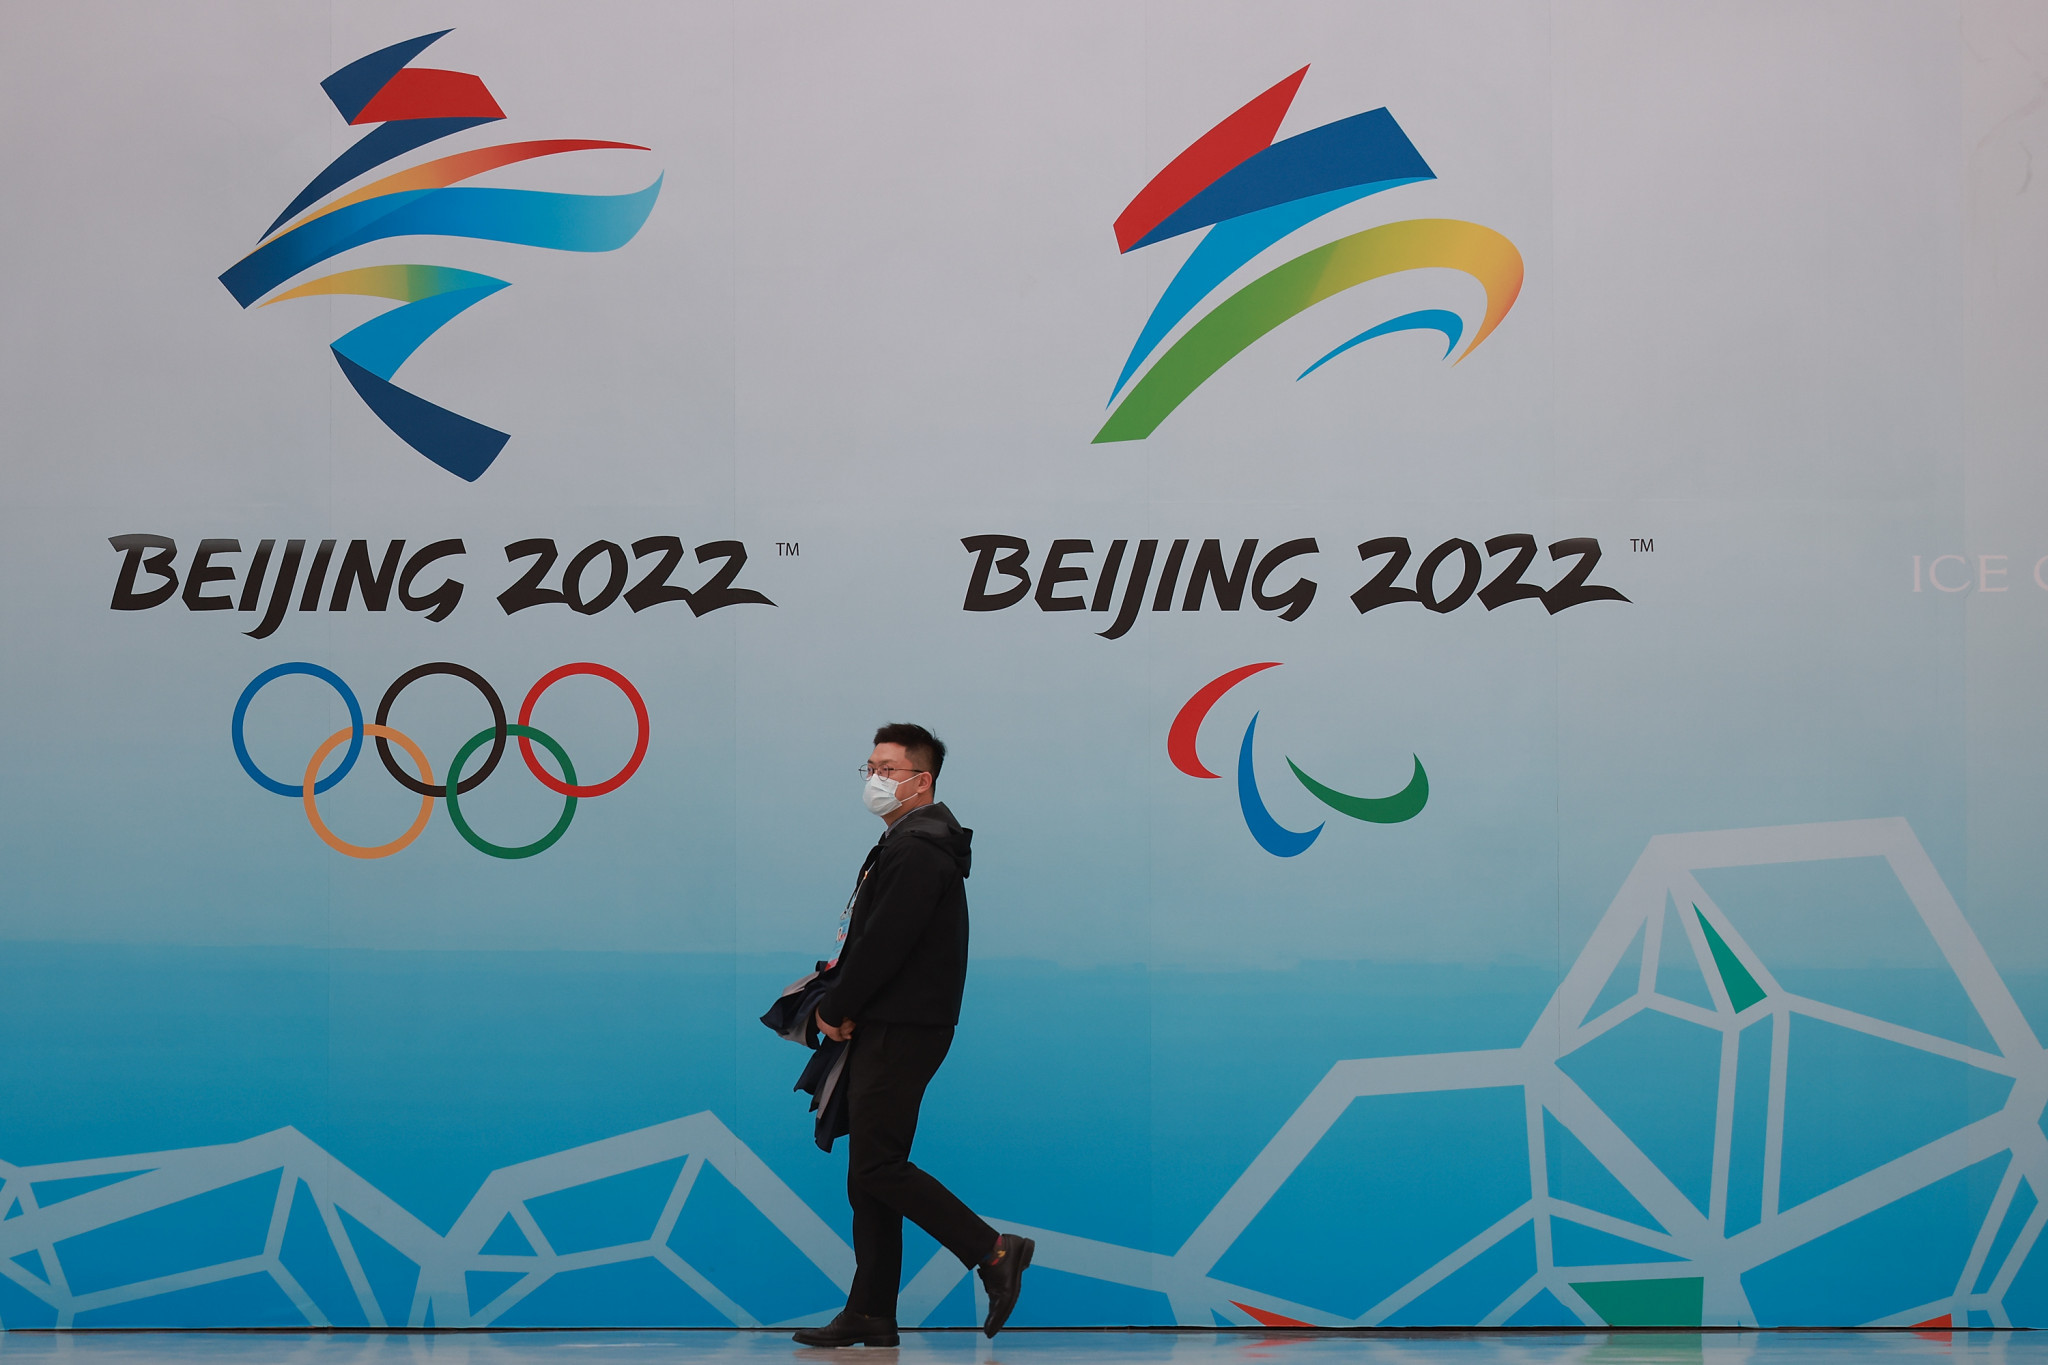 China has allegedly increased security in Tibet prior to the Winter Olympics ©Getty Images